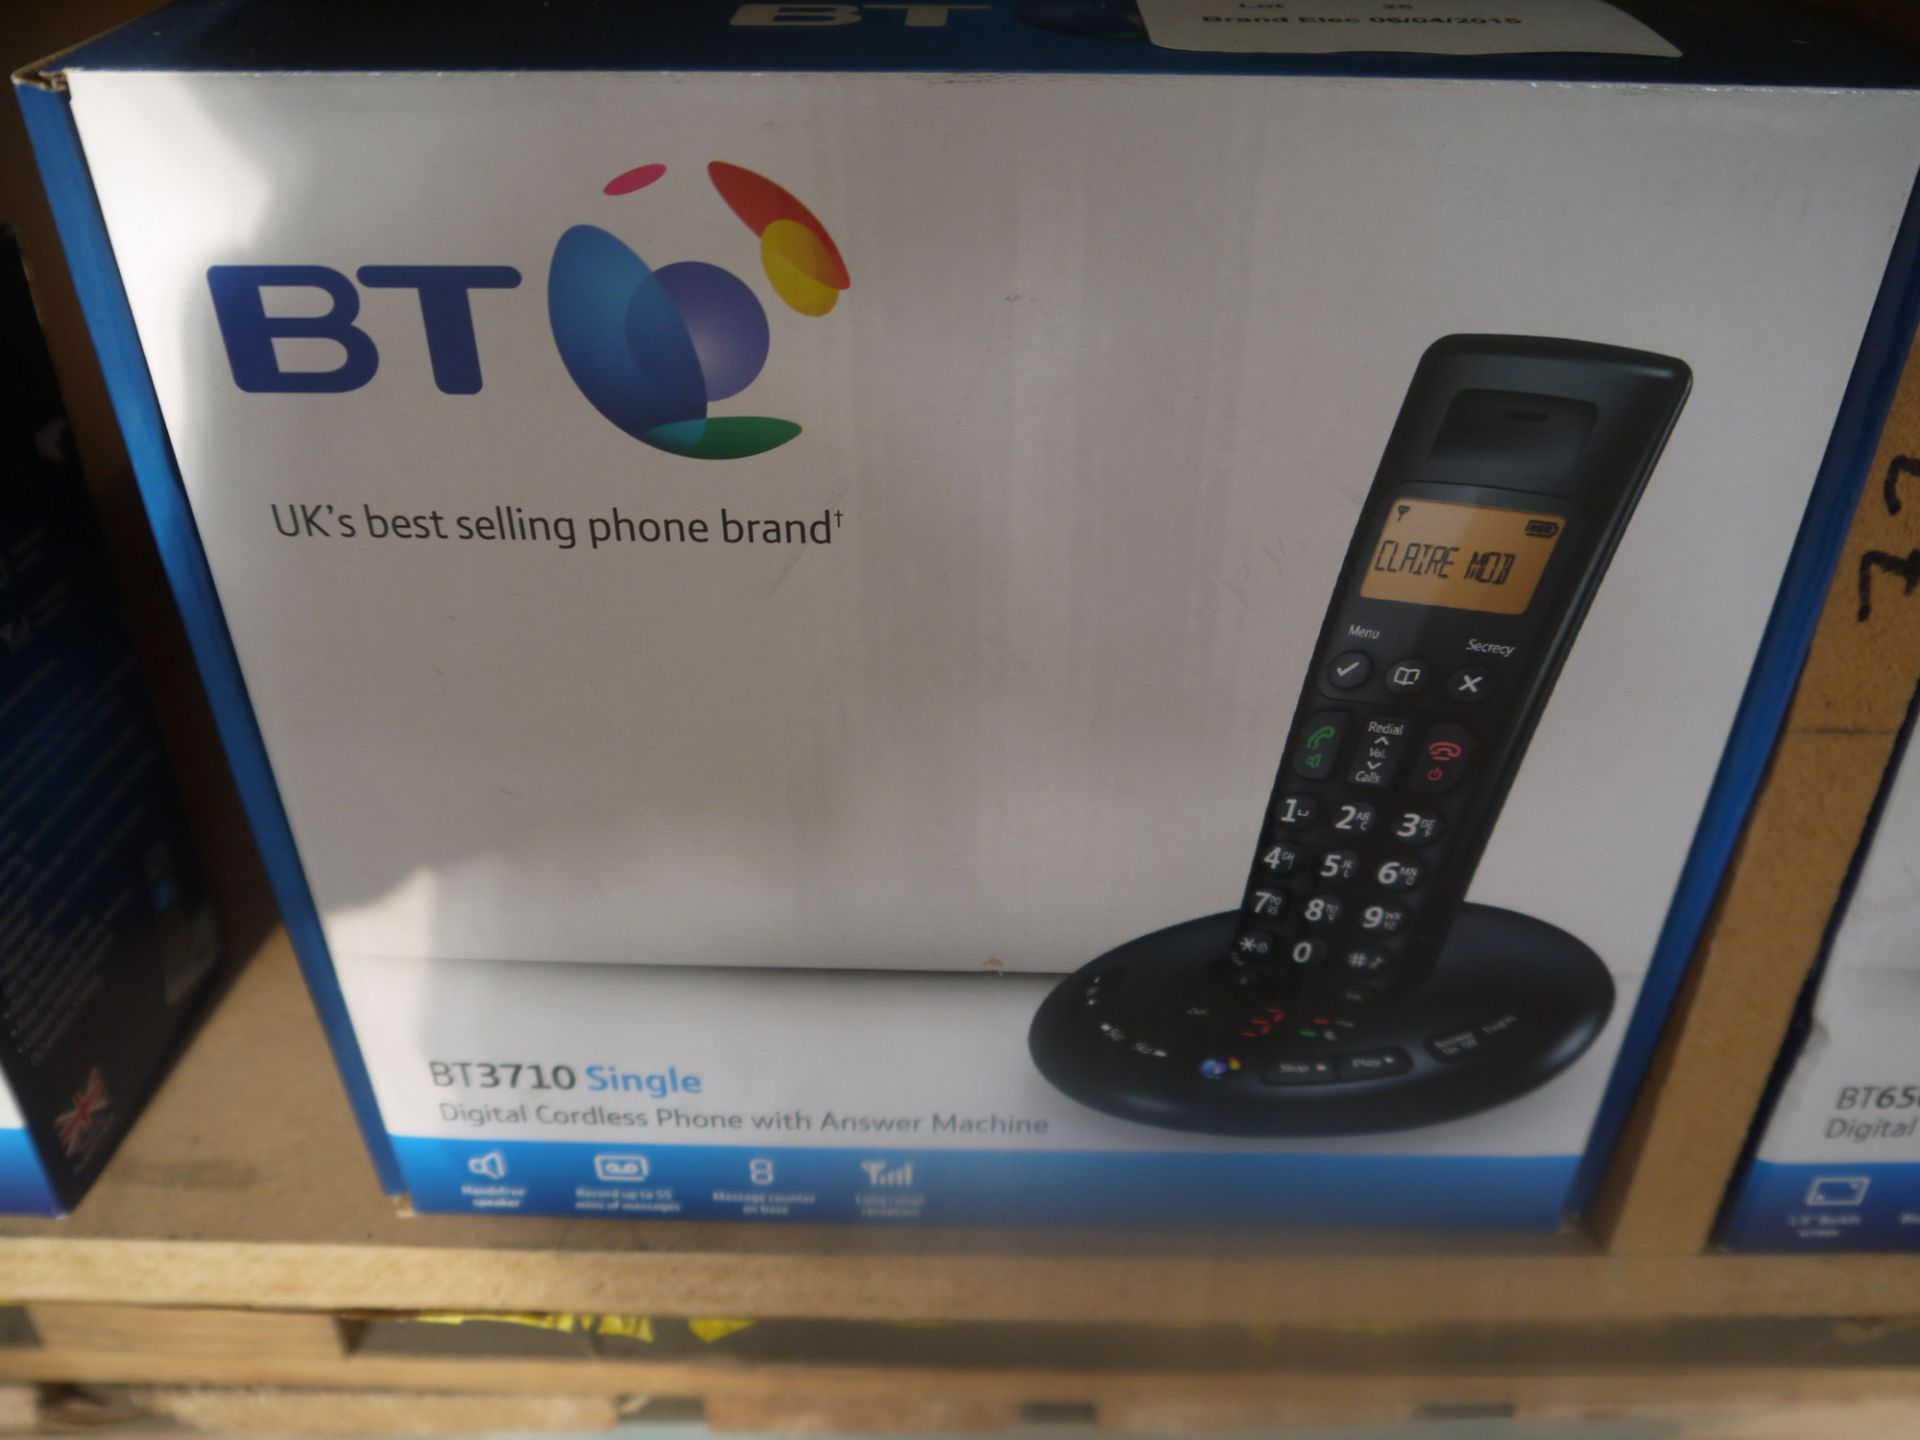 BT 3710 single cordless digital phone with answer machine, boxed